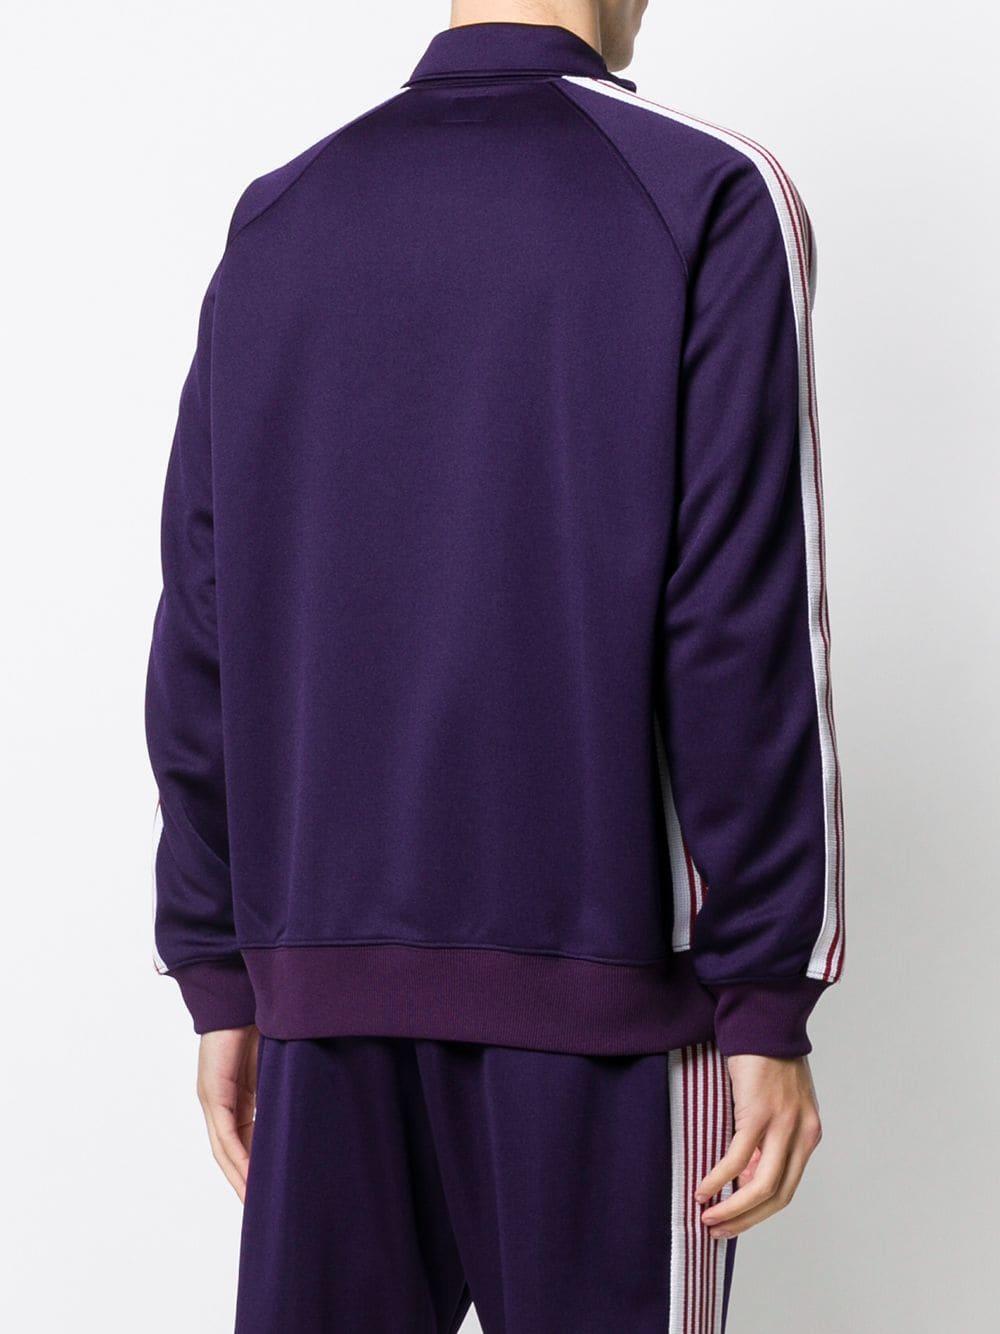 Needles Poly Track Jackets in Purple for Men - Lyst